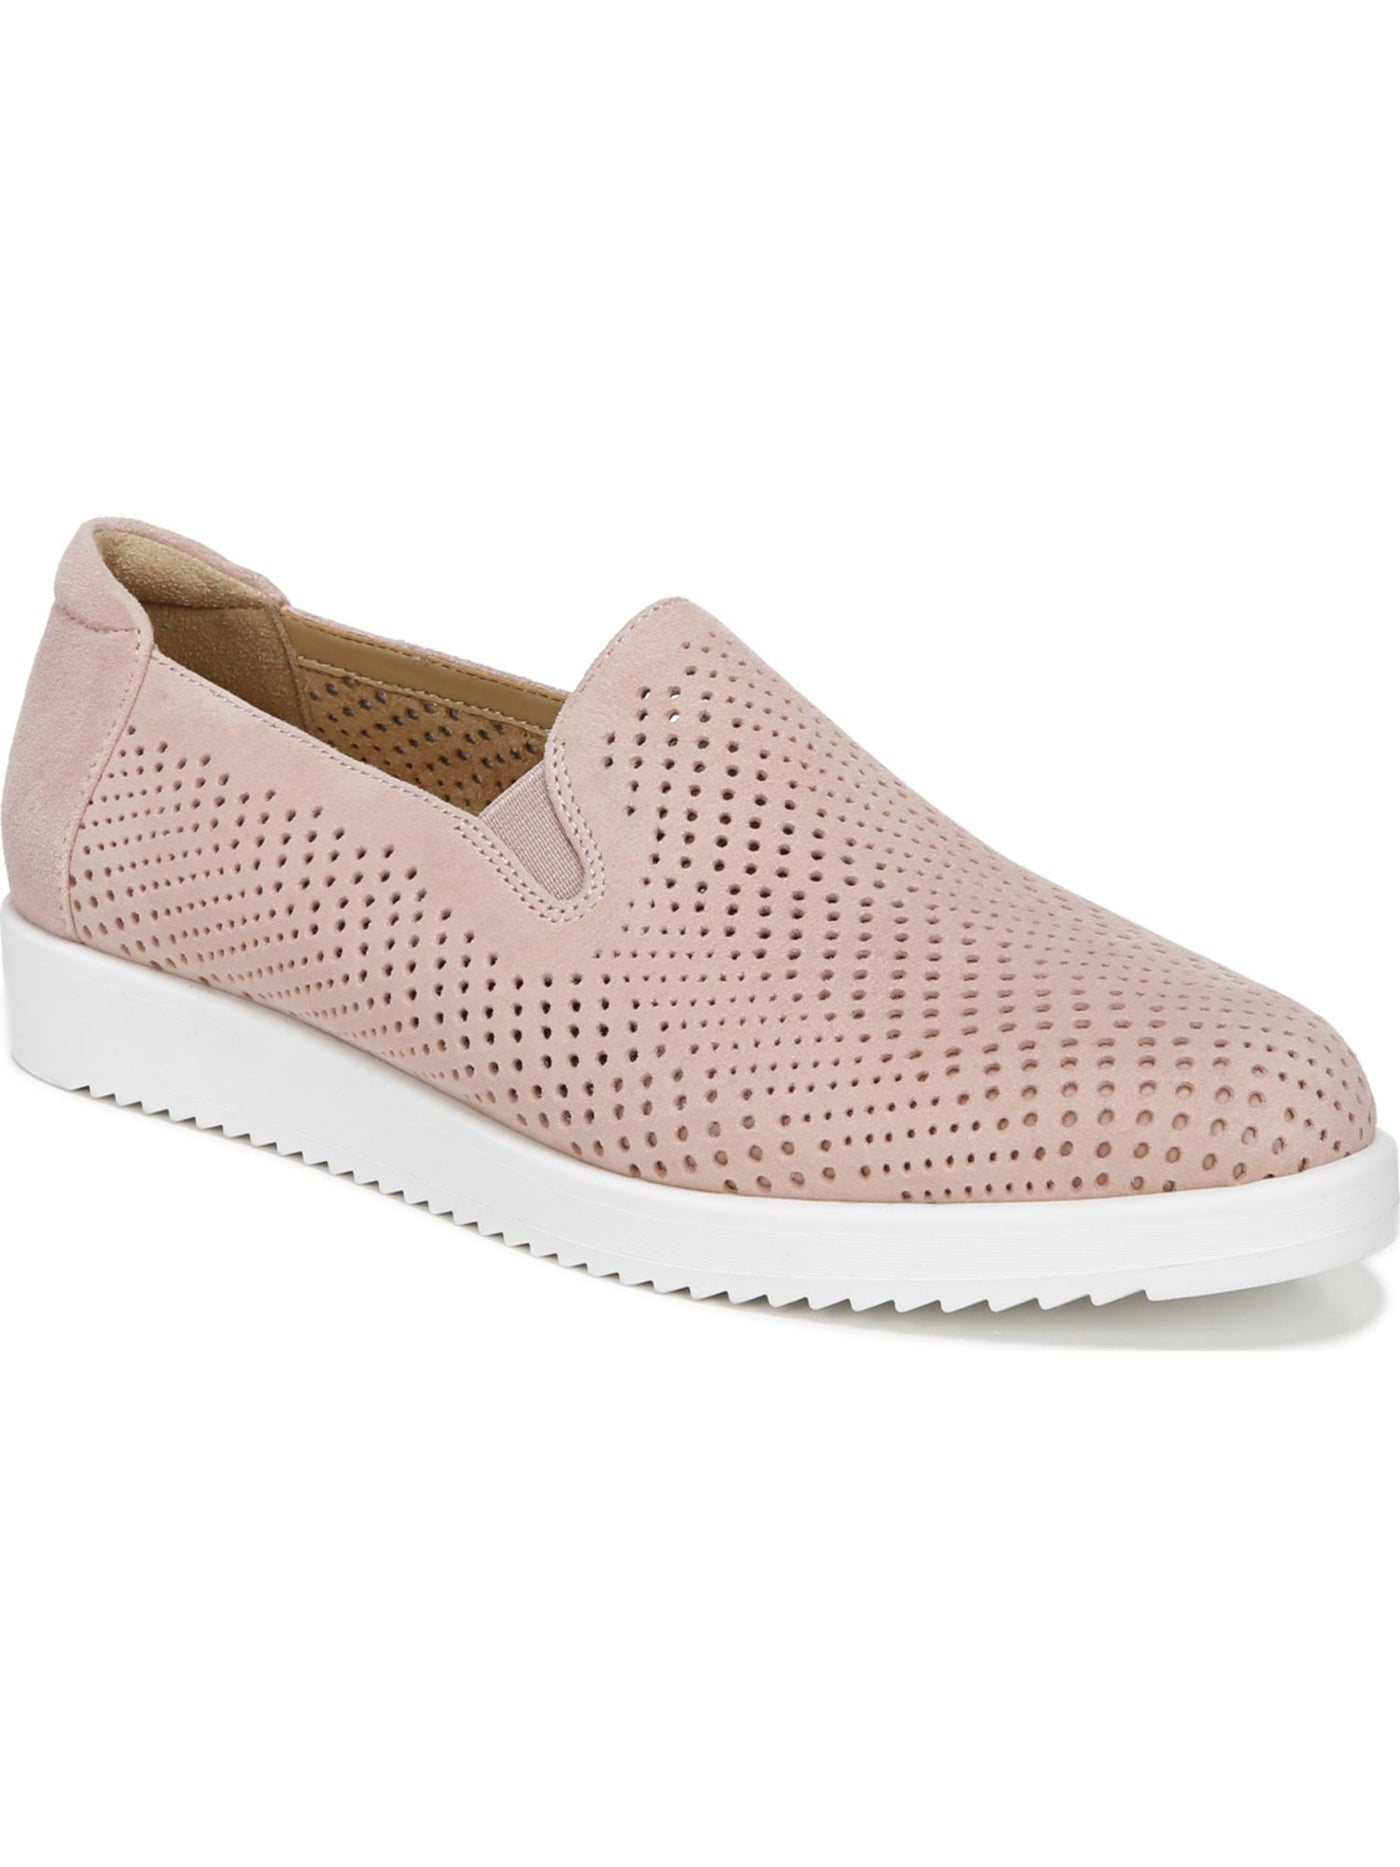 NATURALIZER Womens Pink 1/2" Platform Elastic Goring Perforated Breathable Bonnie Round Toe Wedge Slip On Athletic Sneakers Shoes 6 M